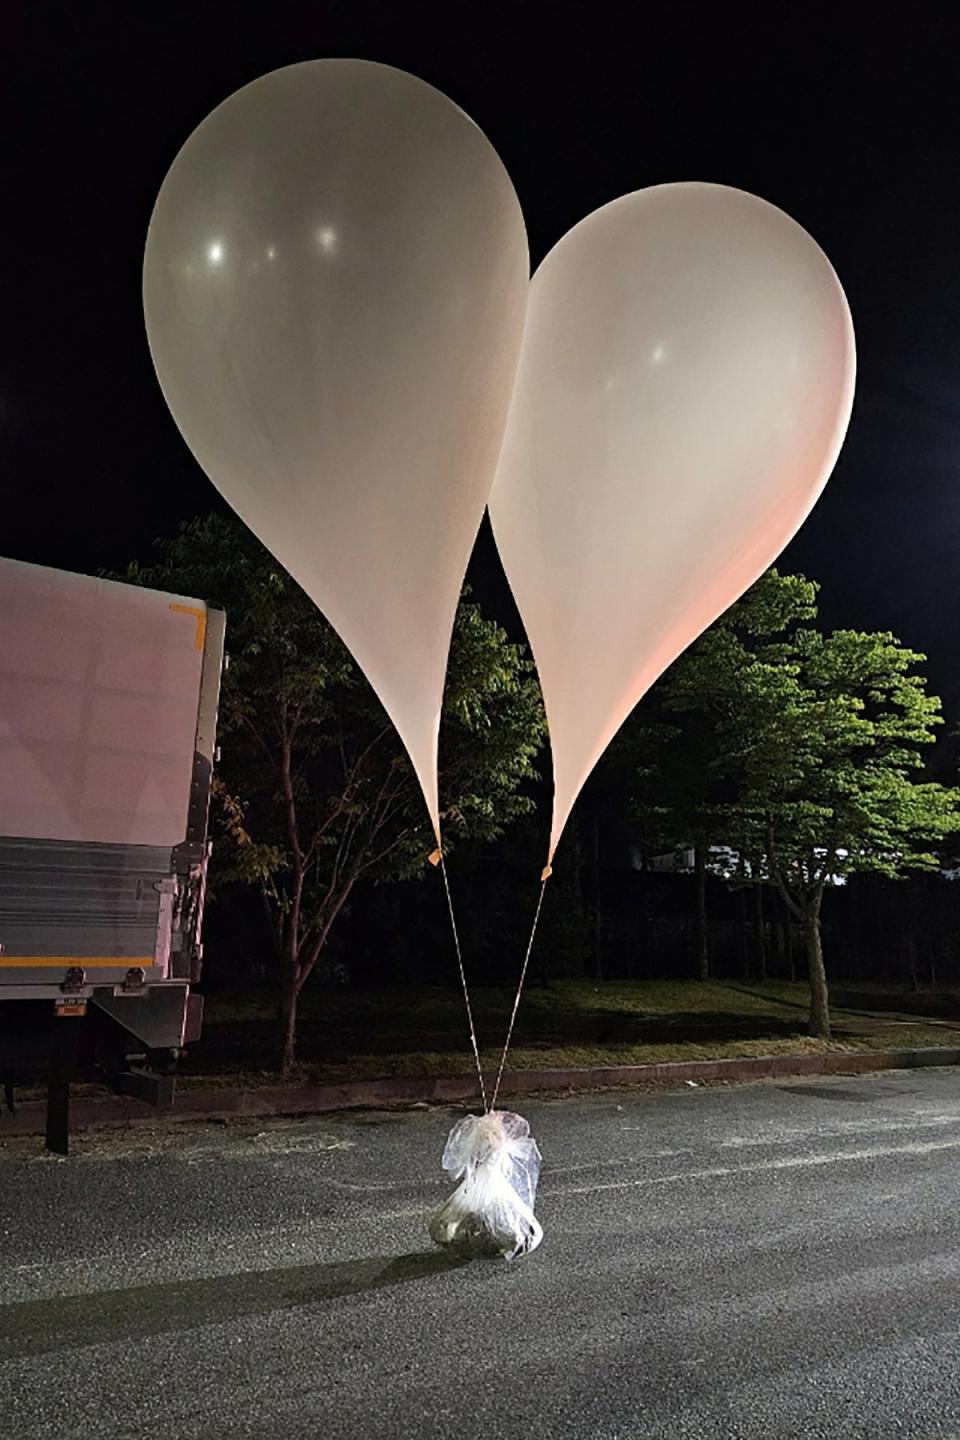 A picture released by the South Korean Defence Ministry on 29 May shows objects thought to be North Korean propaganda material attached to balloons on a street in Chungnam province (South Korean Defence Ministry)